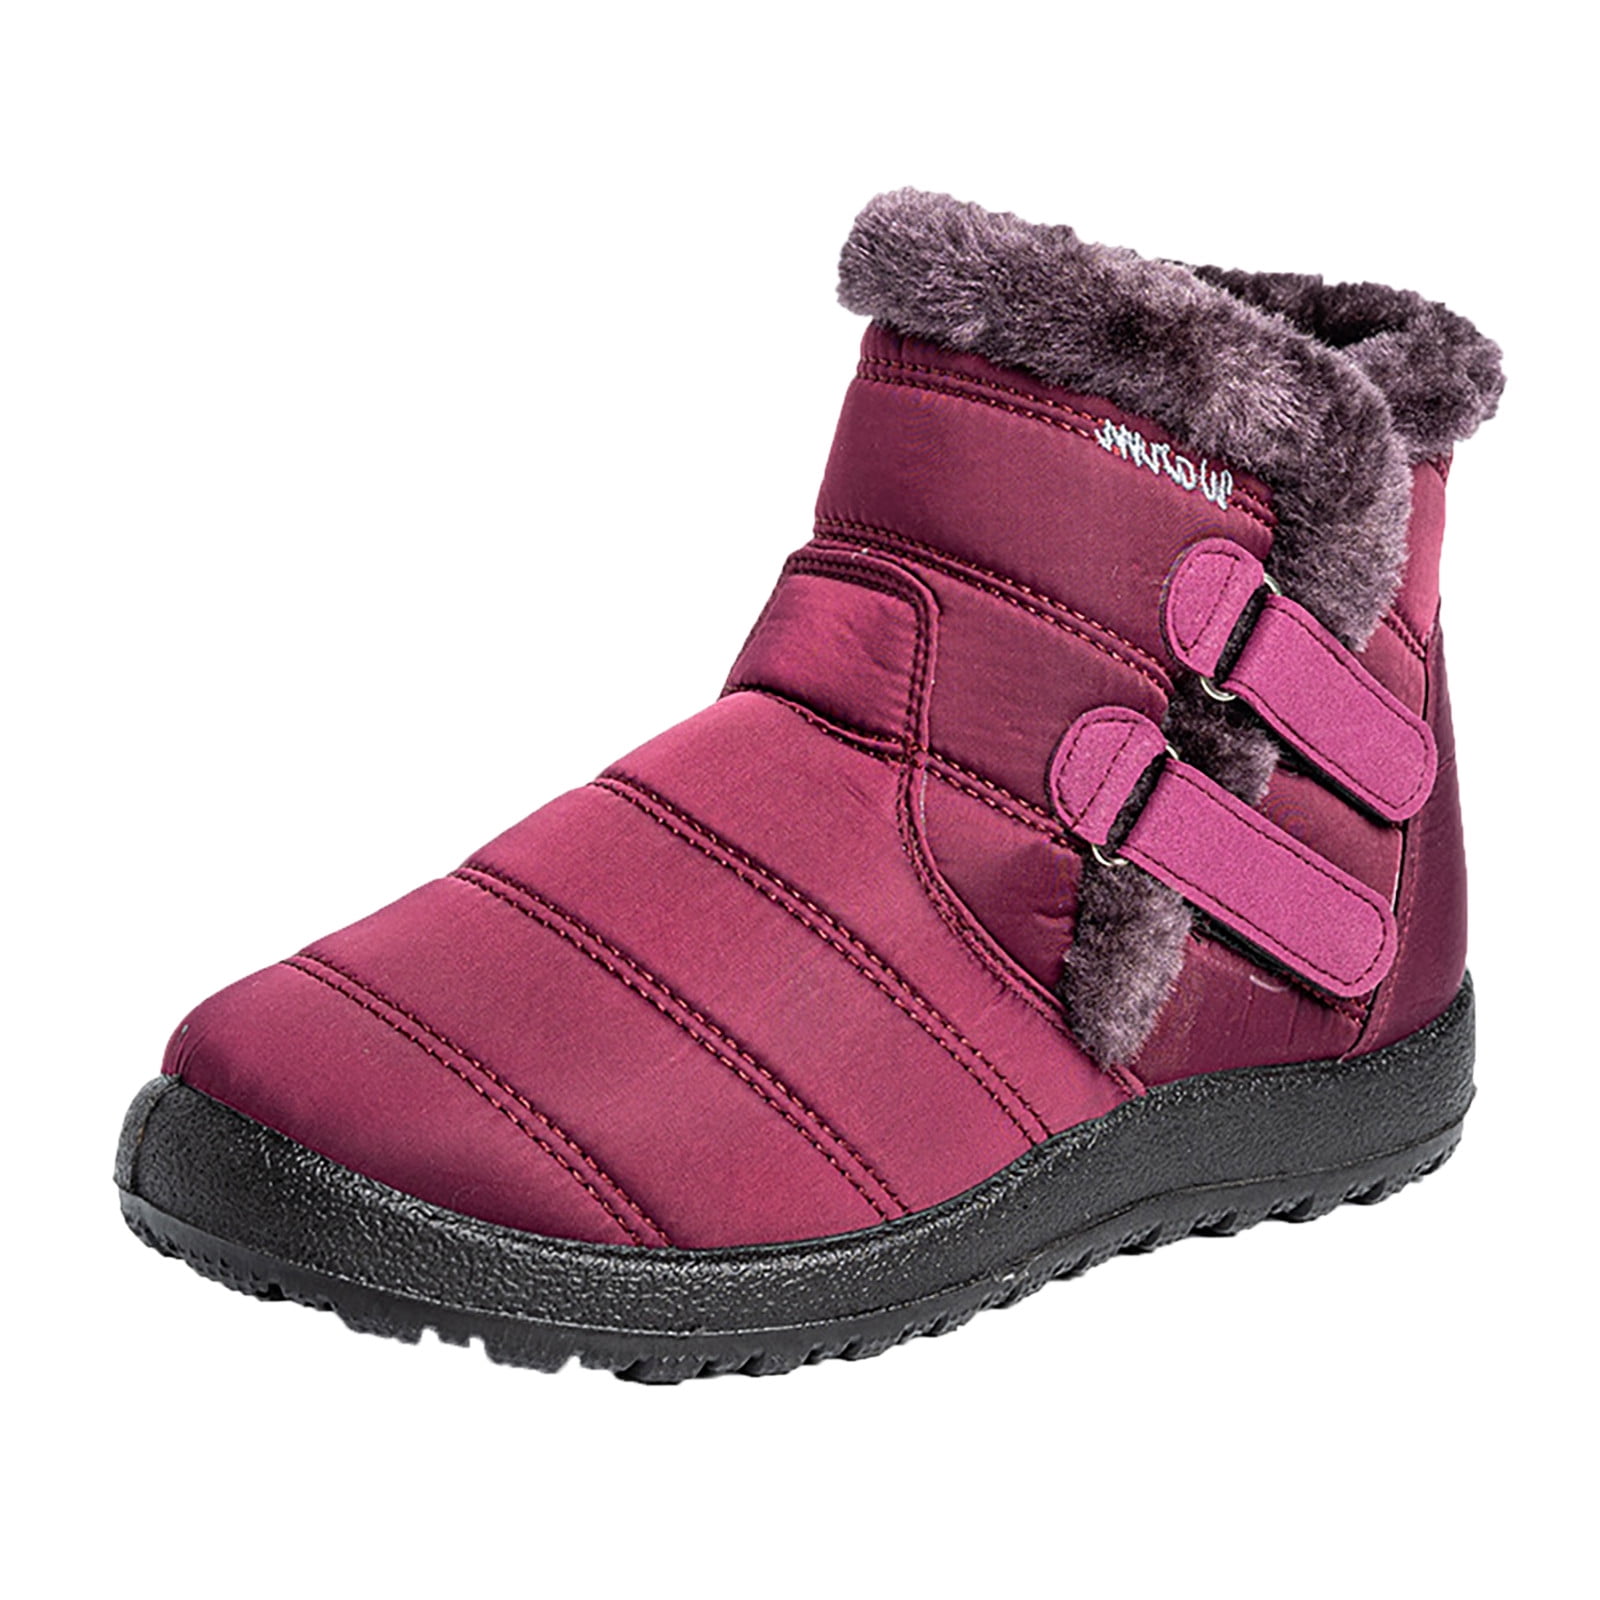 nsendm Female Shoes Adult Snow Boots for Women Knee High Winter Boots Boots  Boots for Women Women's Shoes for Winter Water Proof Boots for Women Navy 7  